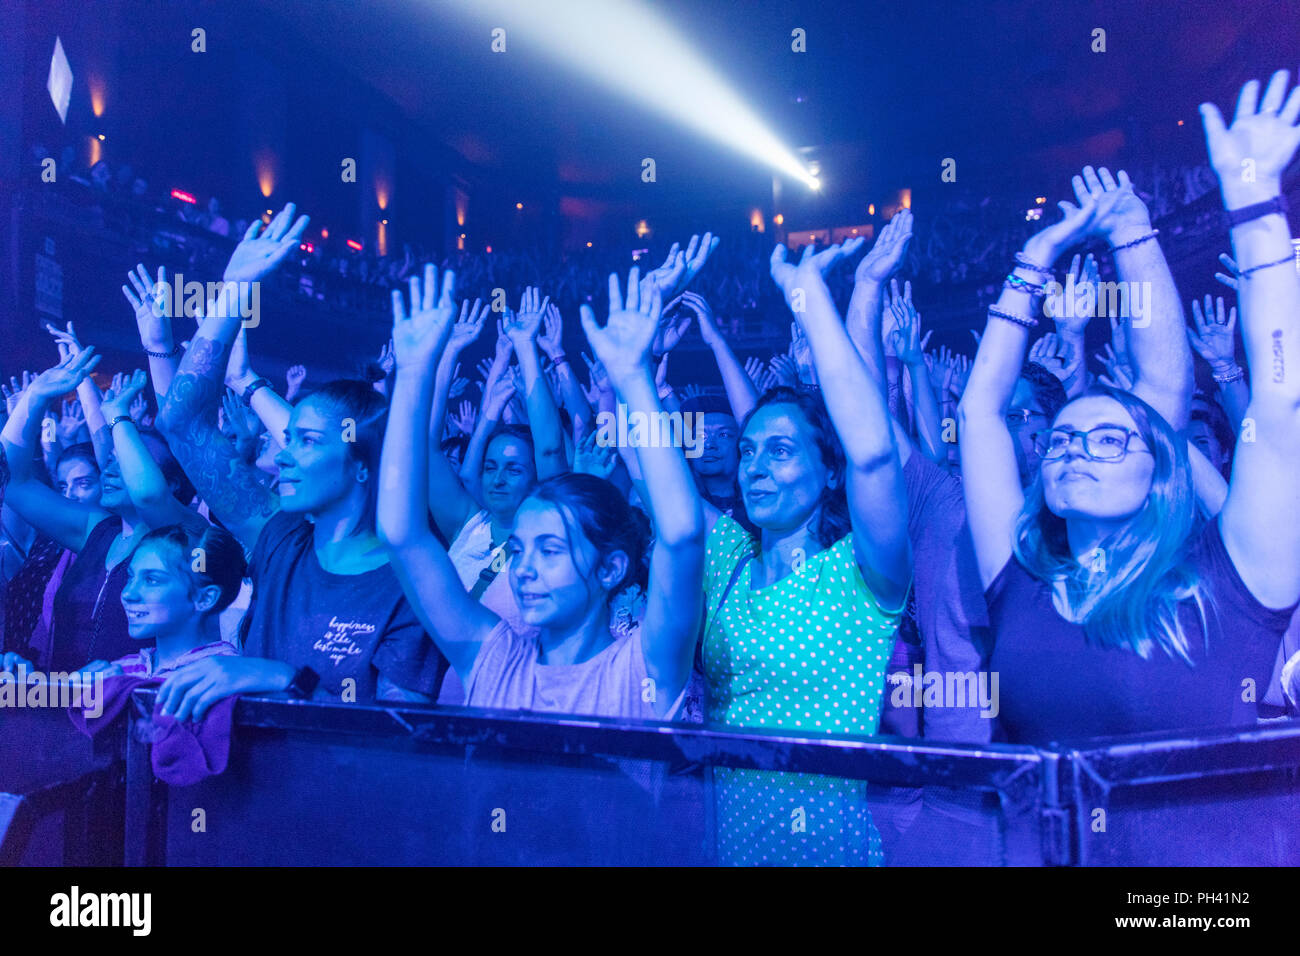 Canada,Quebec,Montreal, Montreal jazz festival, young music fans celebrating the music Stock Photo